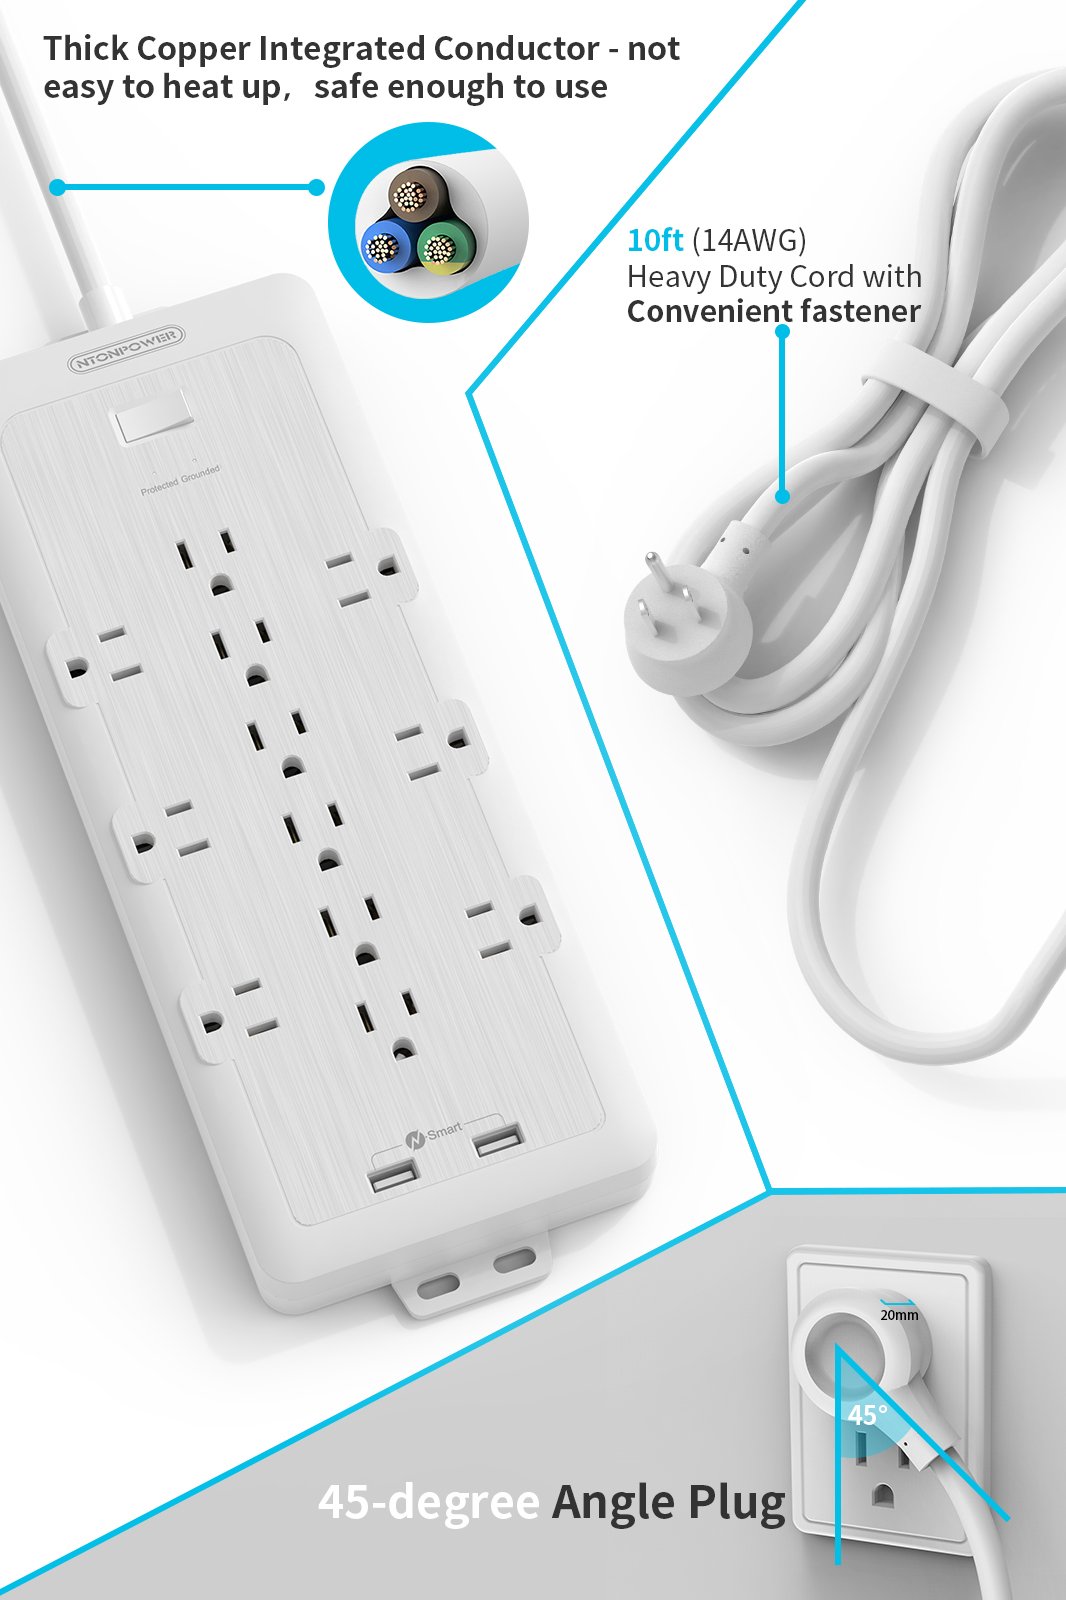 Ntonpower SurgePro  12 Outlets 2 USB 4000 Joules Protector